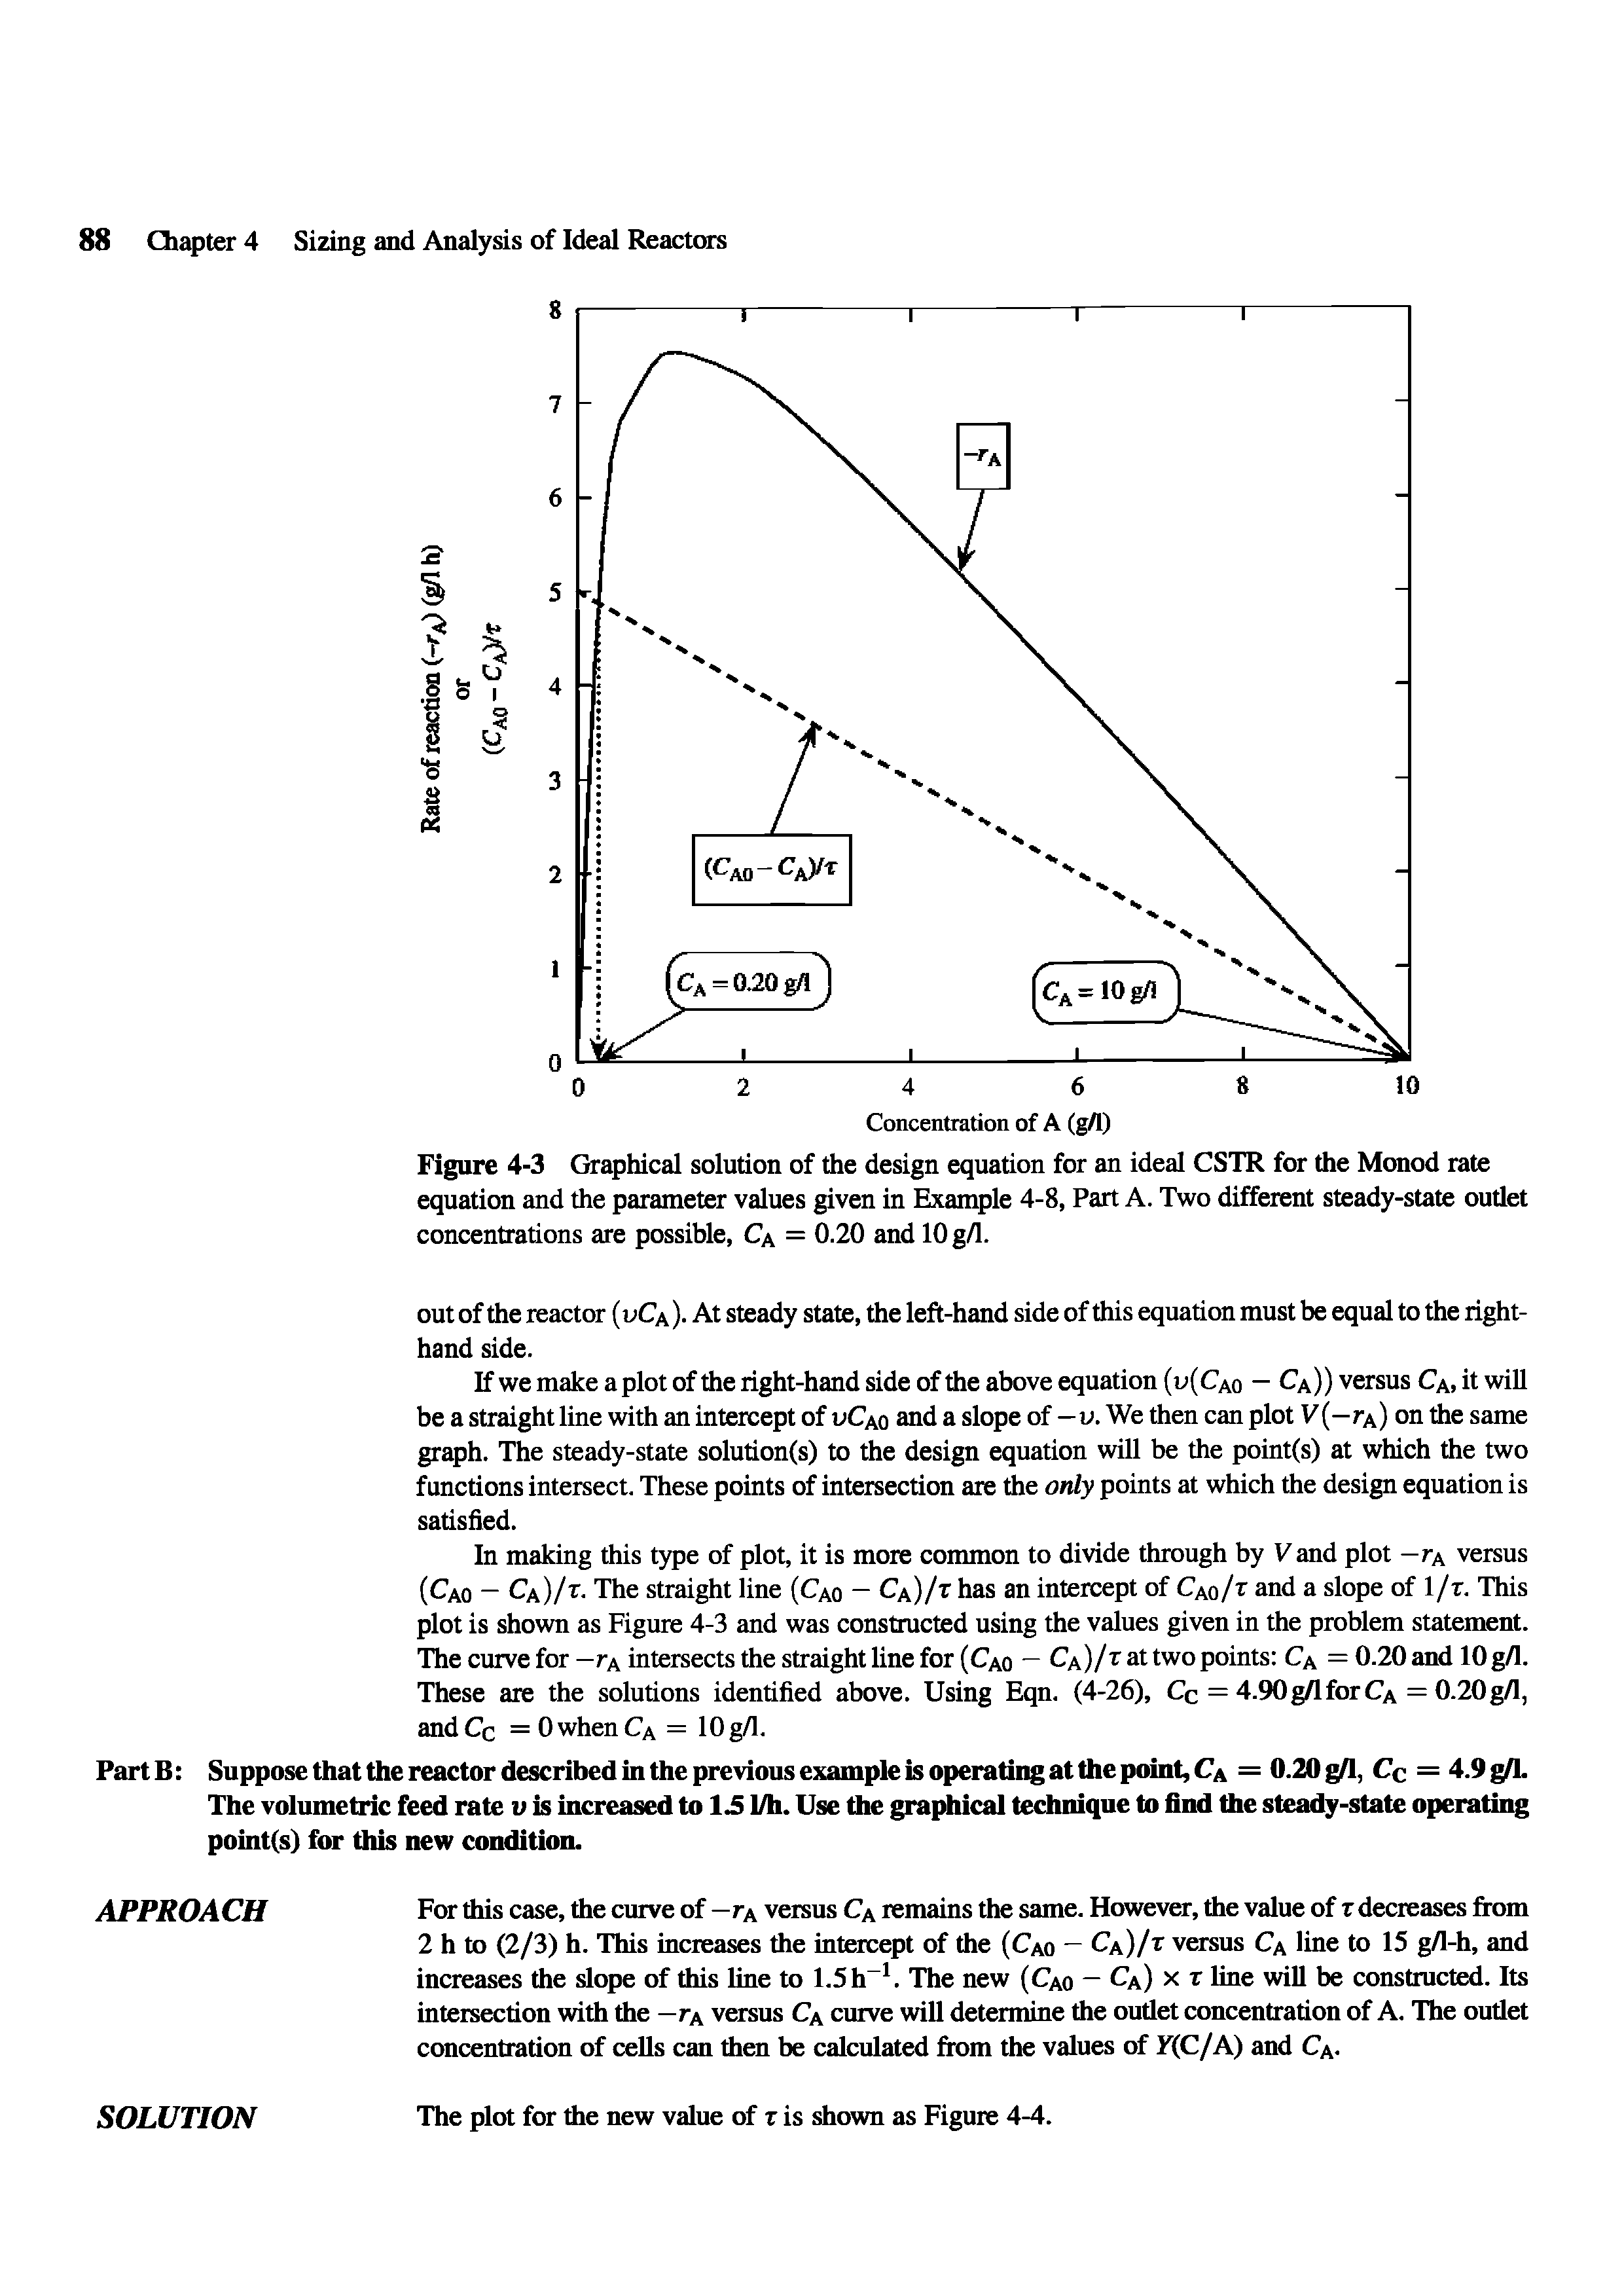 Figure 4-3 Graphical solution of the design equation for an ideal CSTR for the Monod rate equation and the parameter values given in Example 4-8, Part A. Two different steady-state outlet concentrations are possible, Ca = 0.20 and 10 g/1.